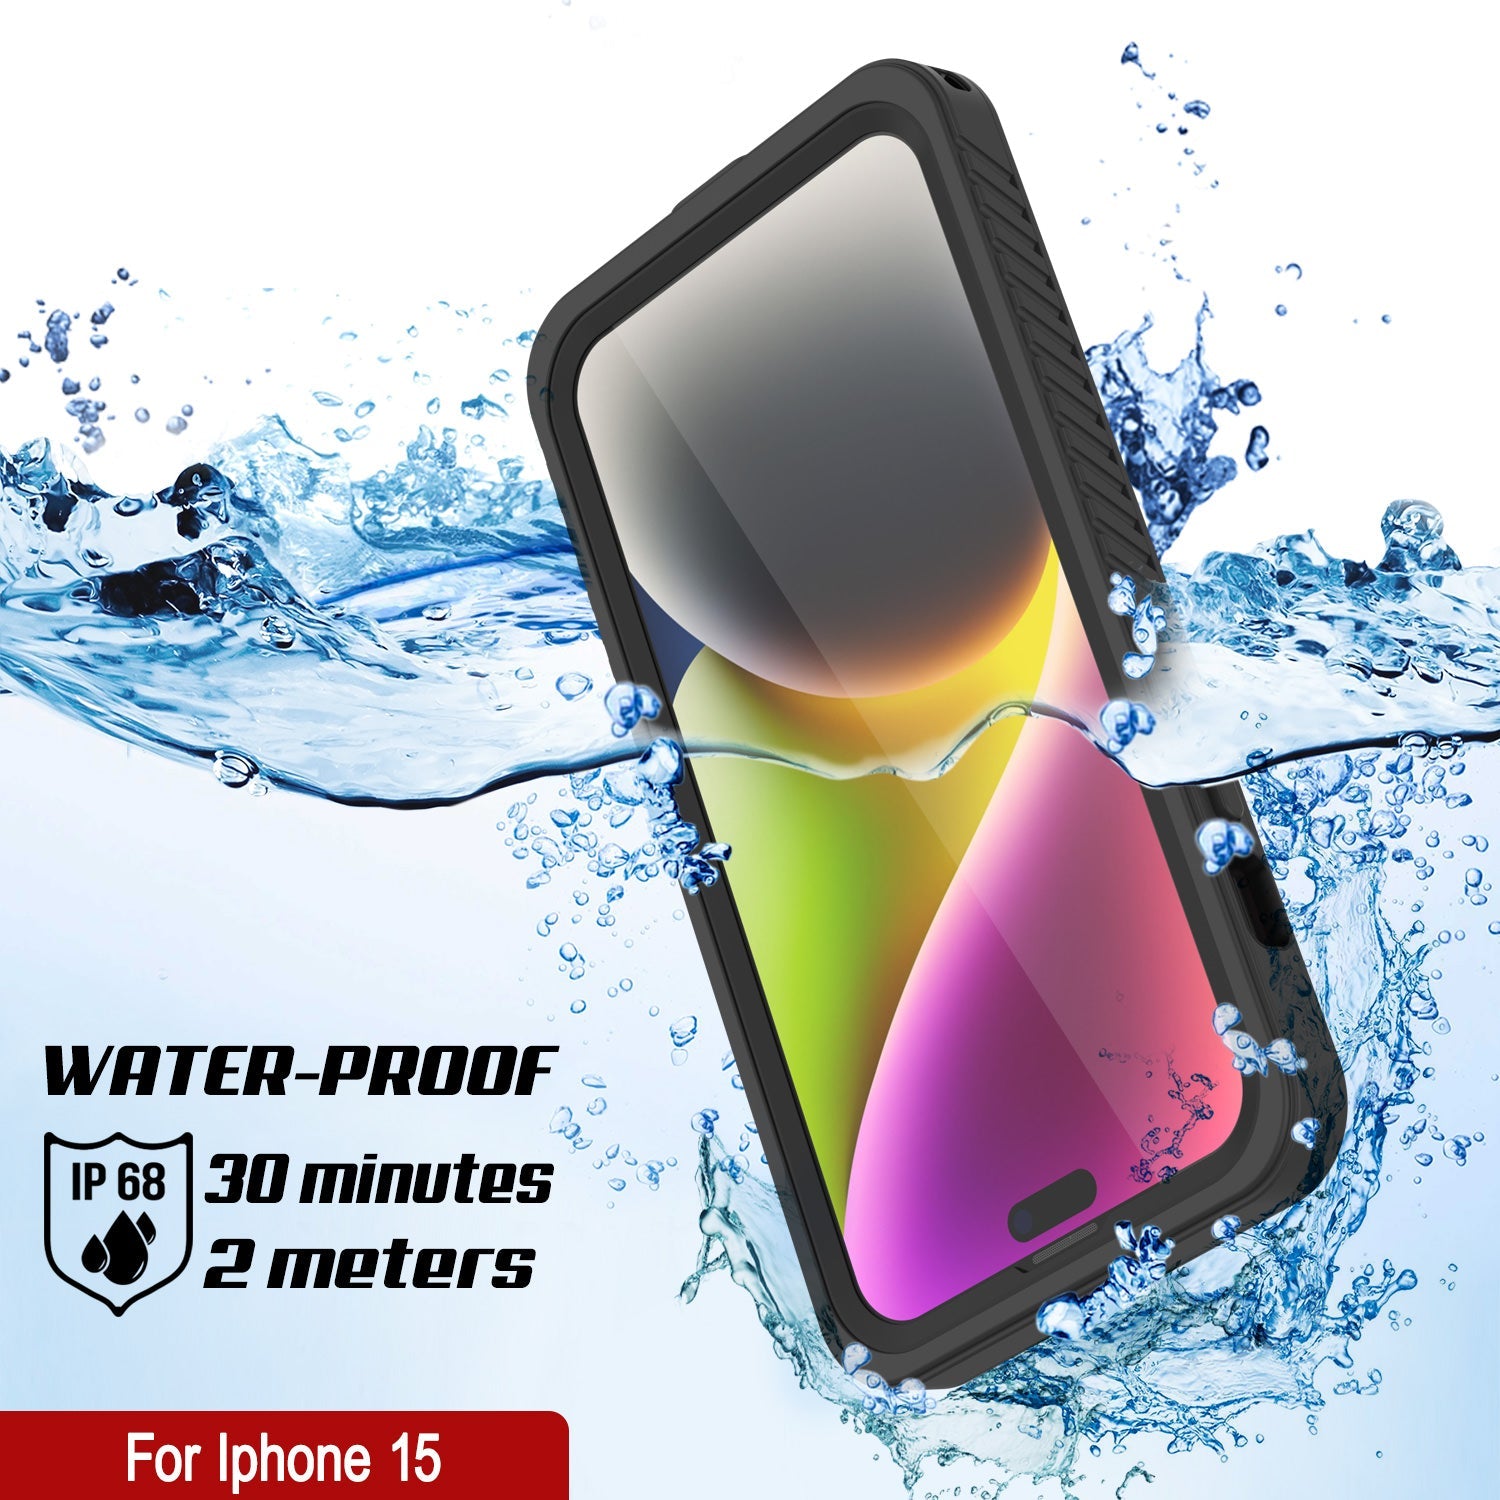 iPhone 15  Waterproof Case, Punkcase [Extreme Series] Armor Cover W/ Built In Screen Protector [Black]